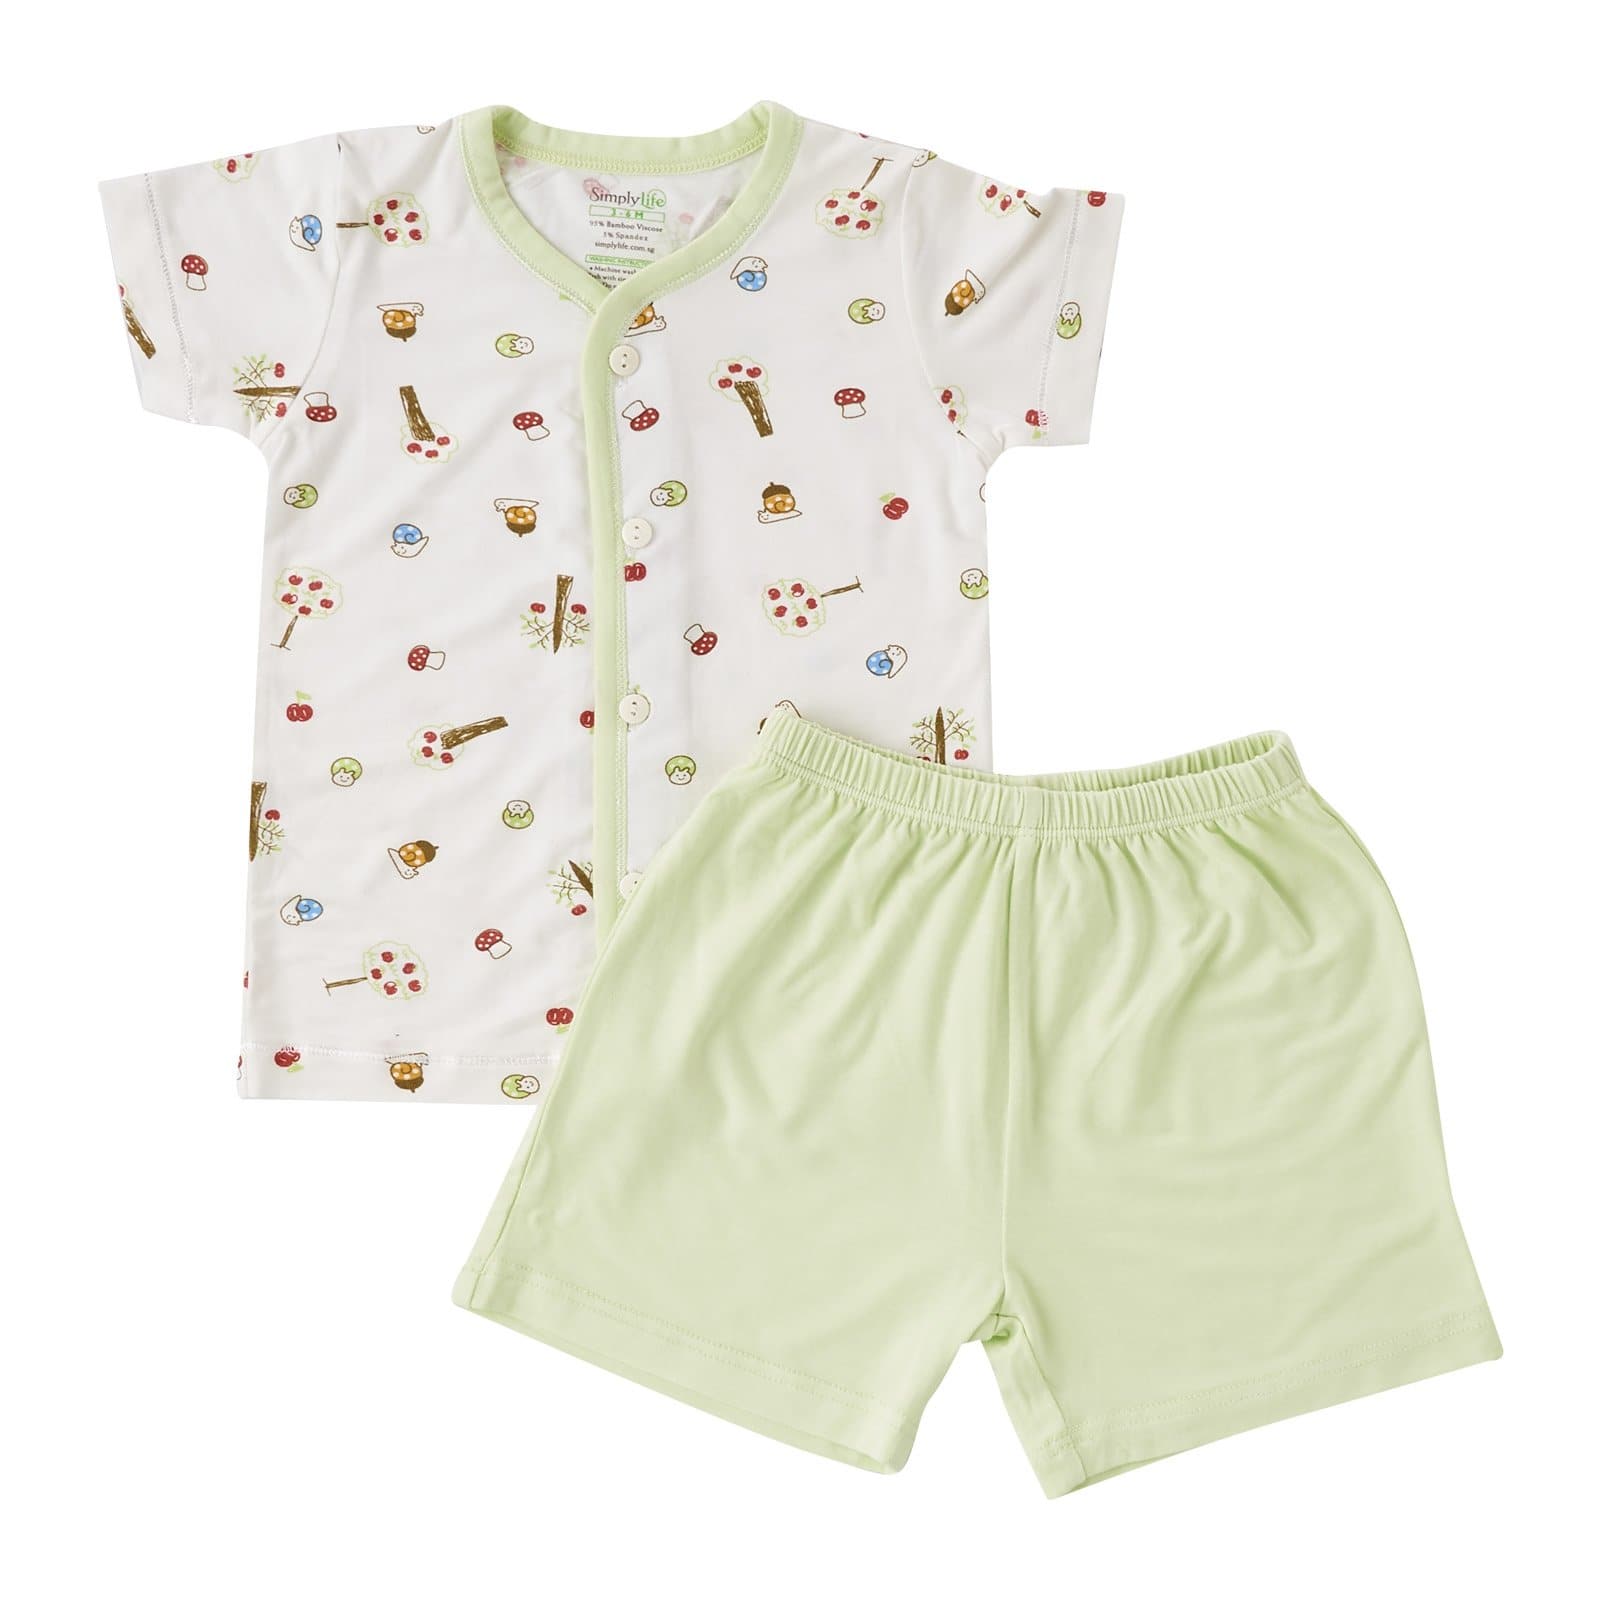 Apples - Short sleeved button vest with shorts (Mint) - Simply Life